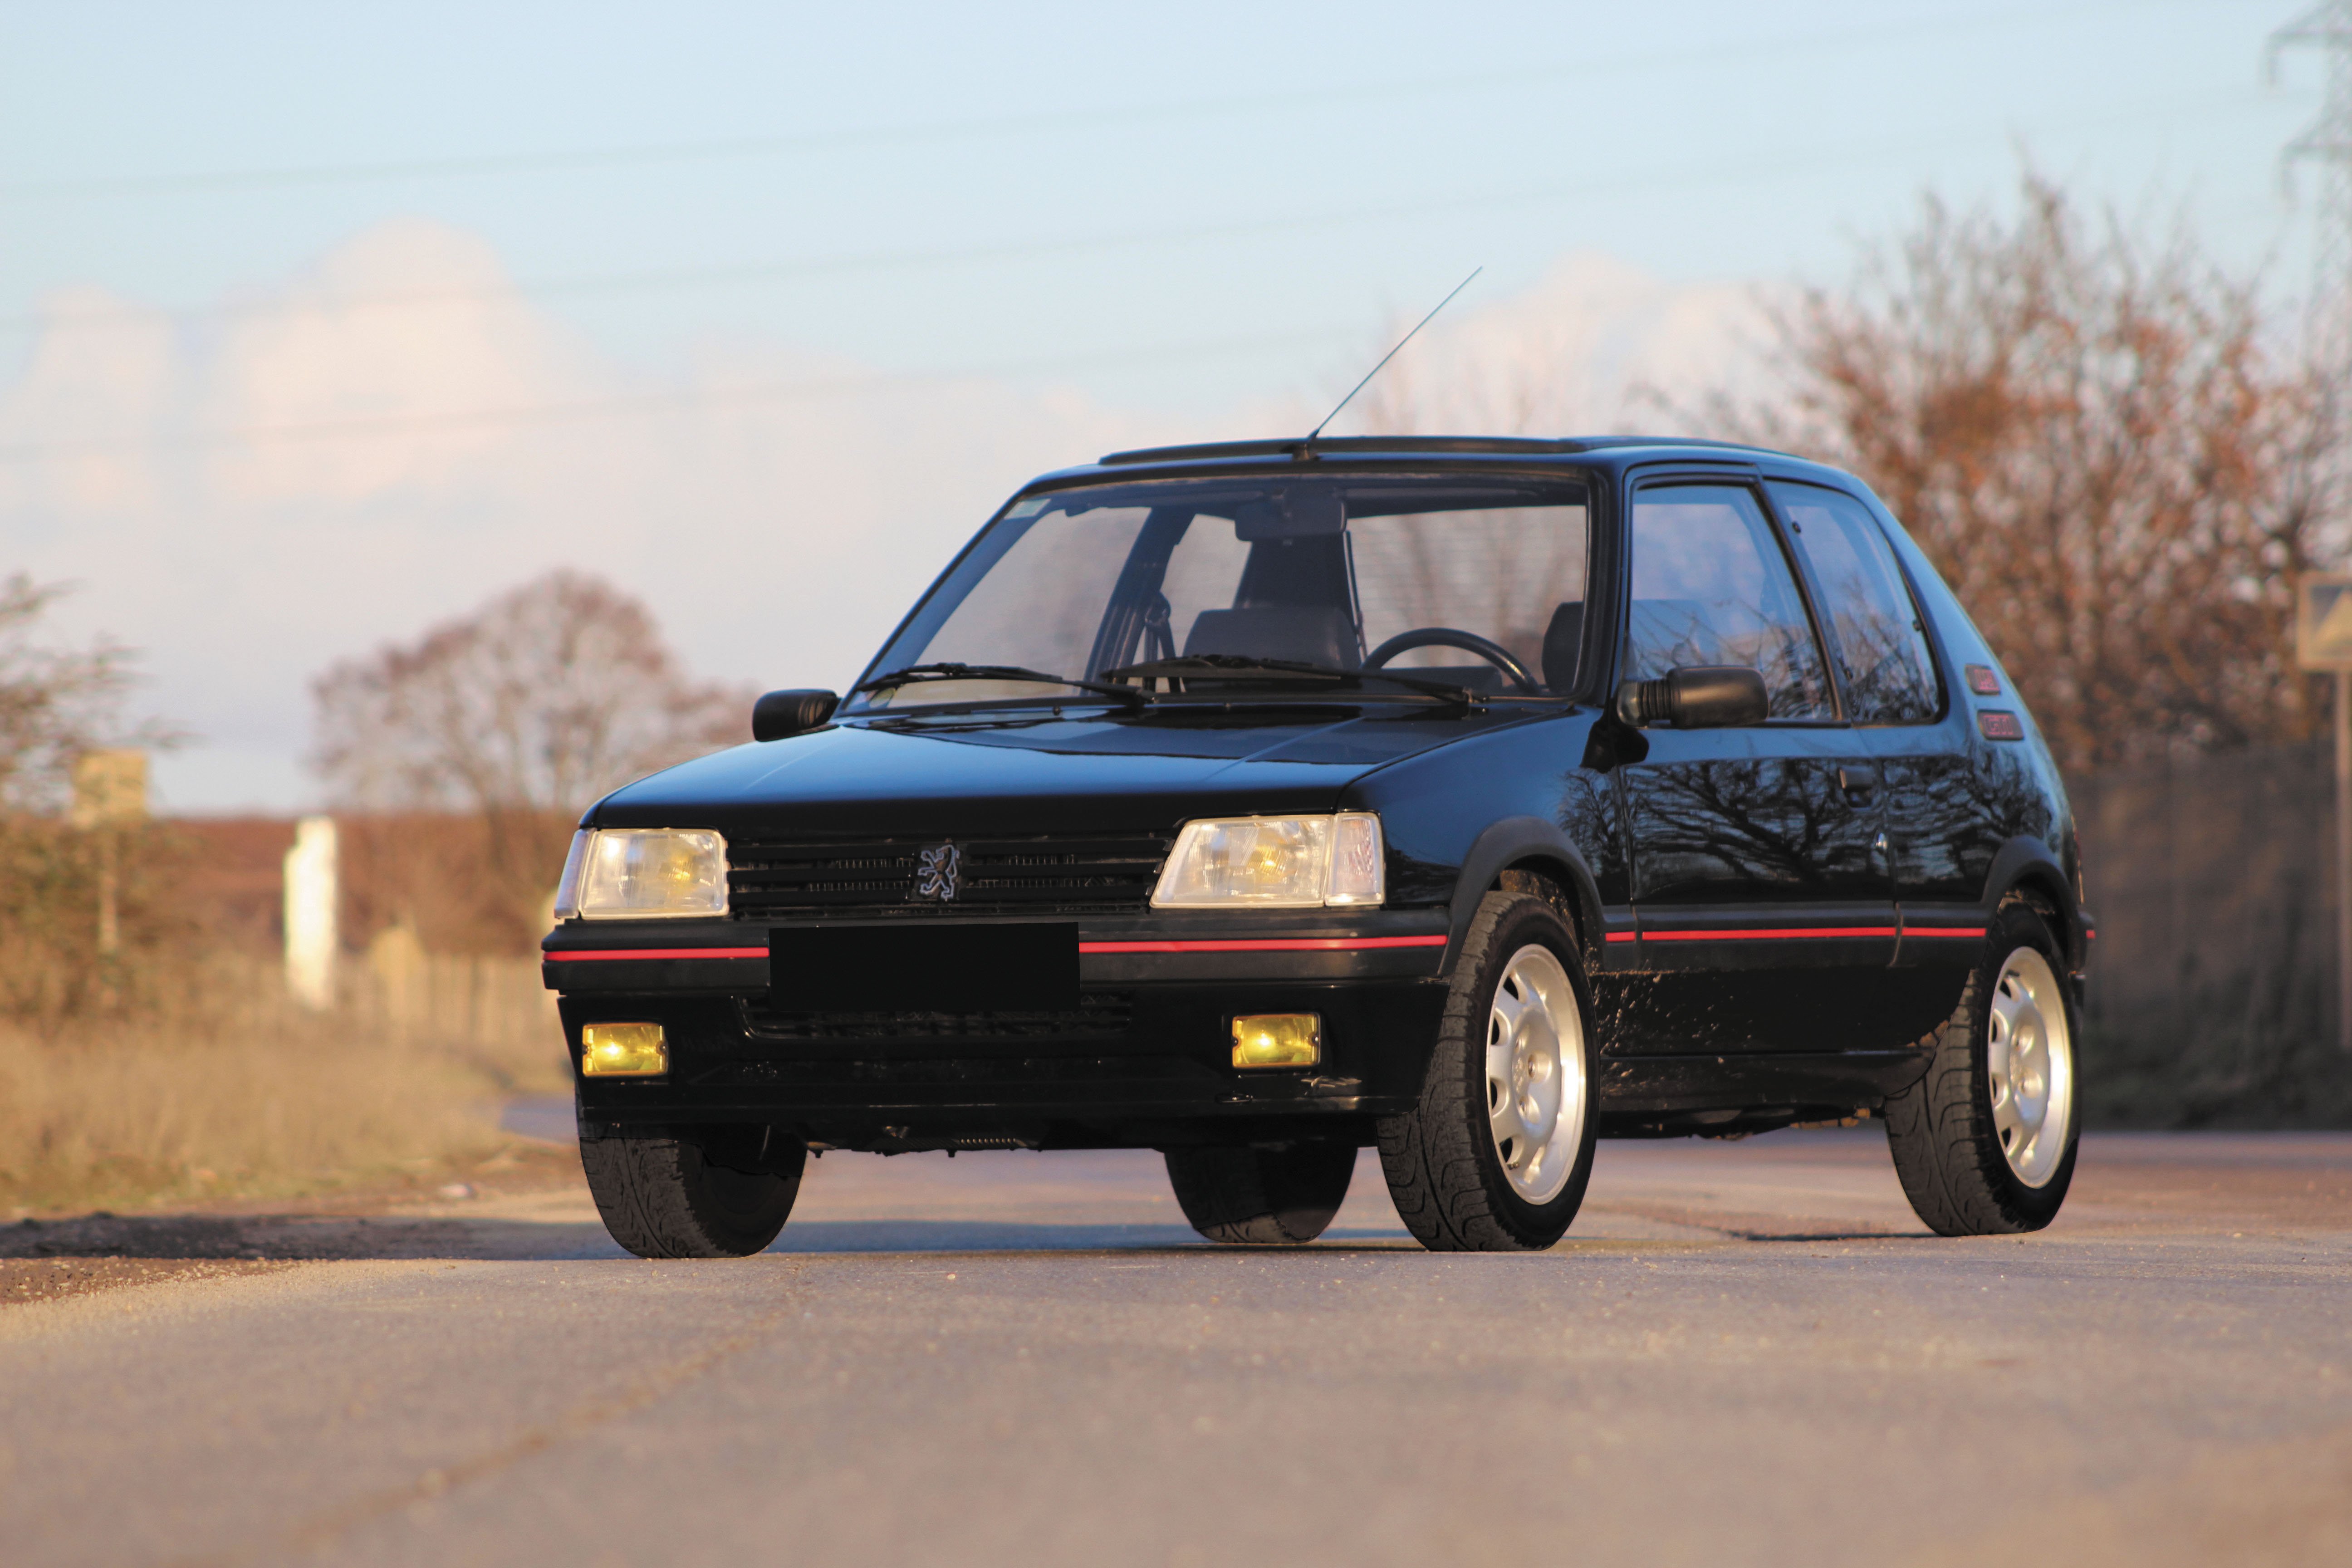 Collectibles: Peugeot 205